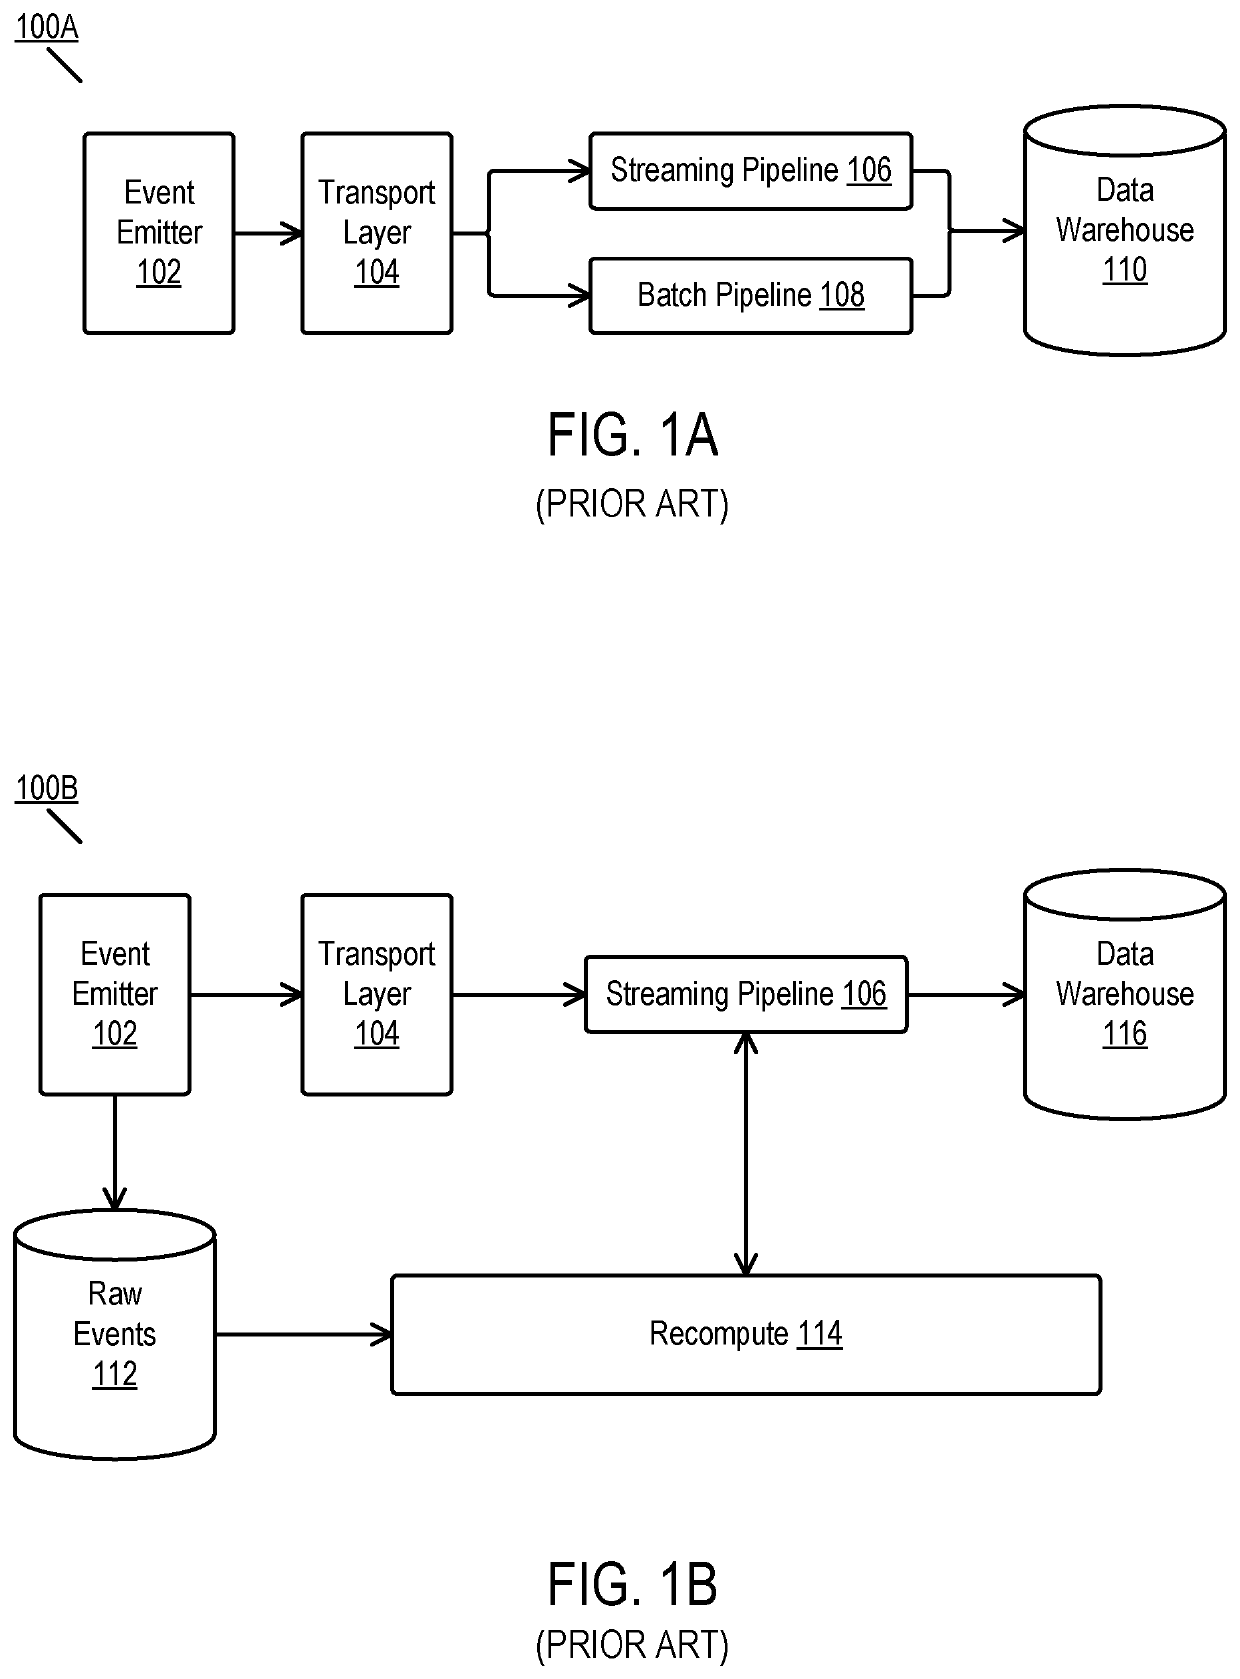 Partitioned backing store implemented in a distributed database